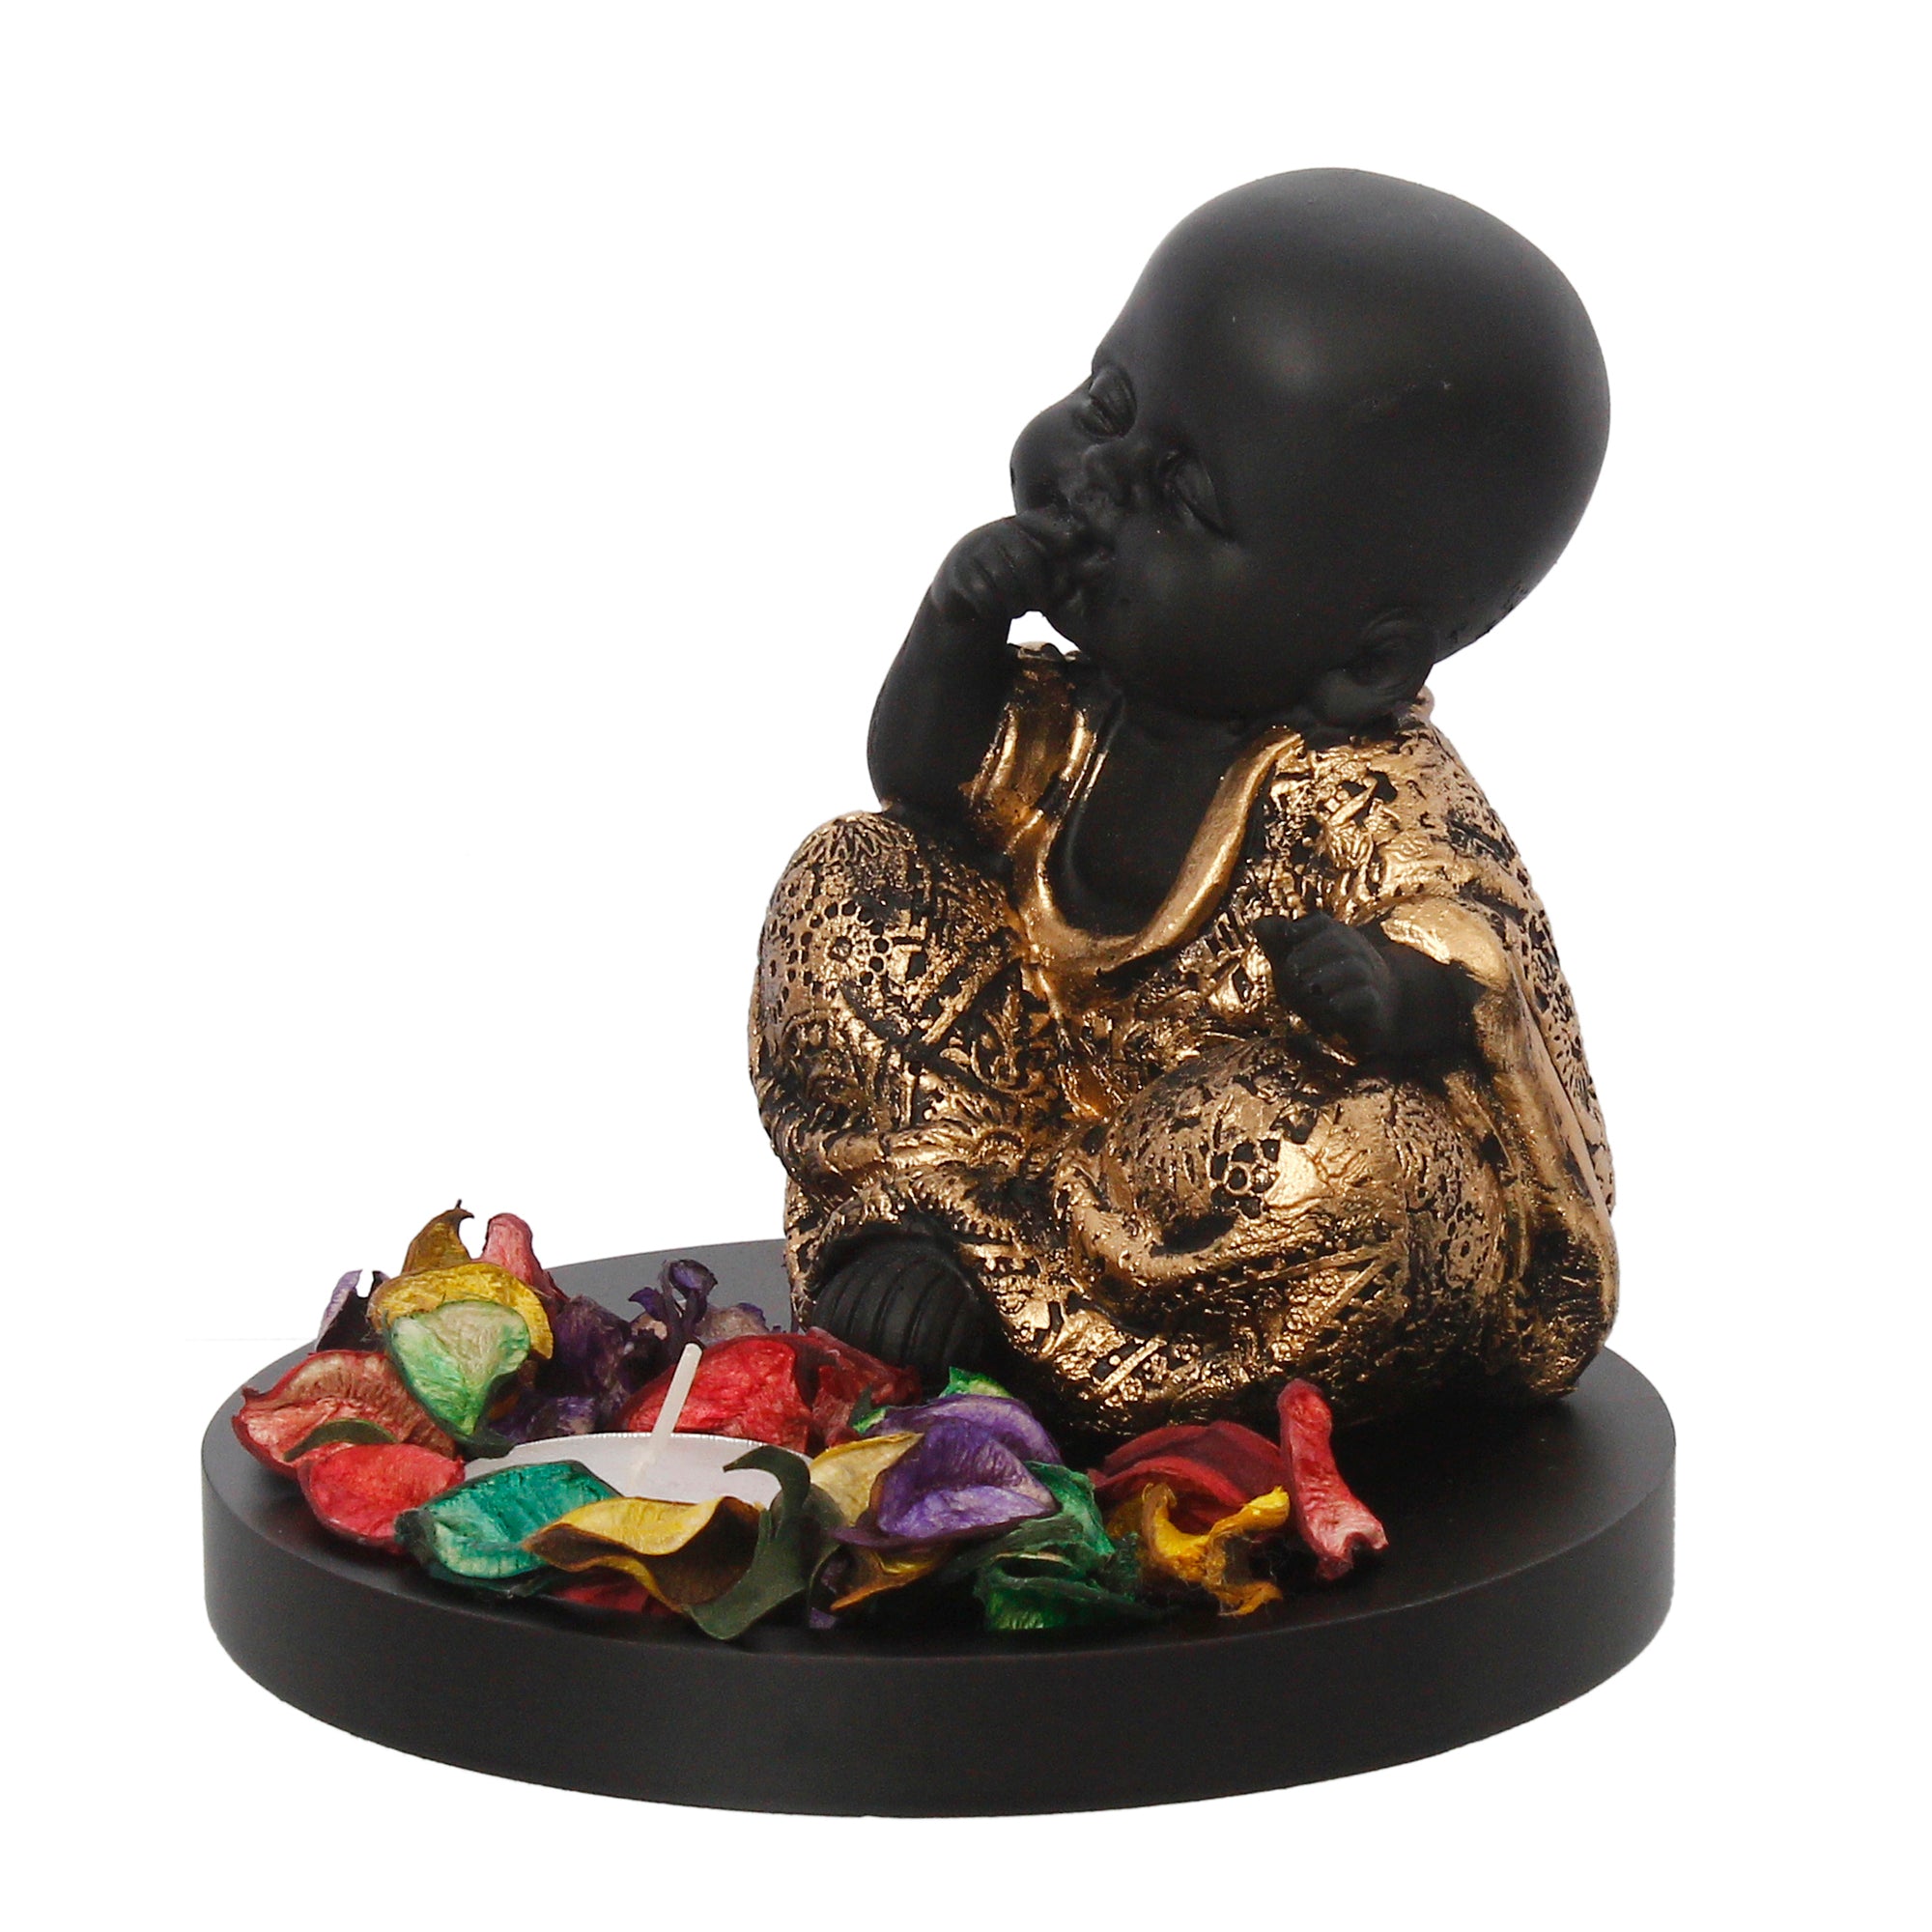 Decorative Smiling Golden Monk Buddha with Wooden Base, Fragranced Petals and Tealight 5